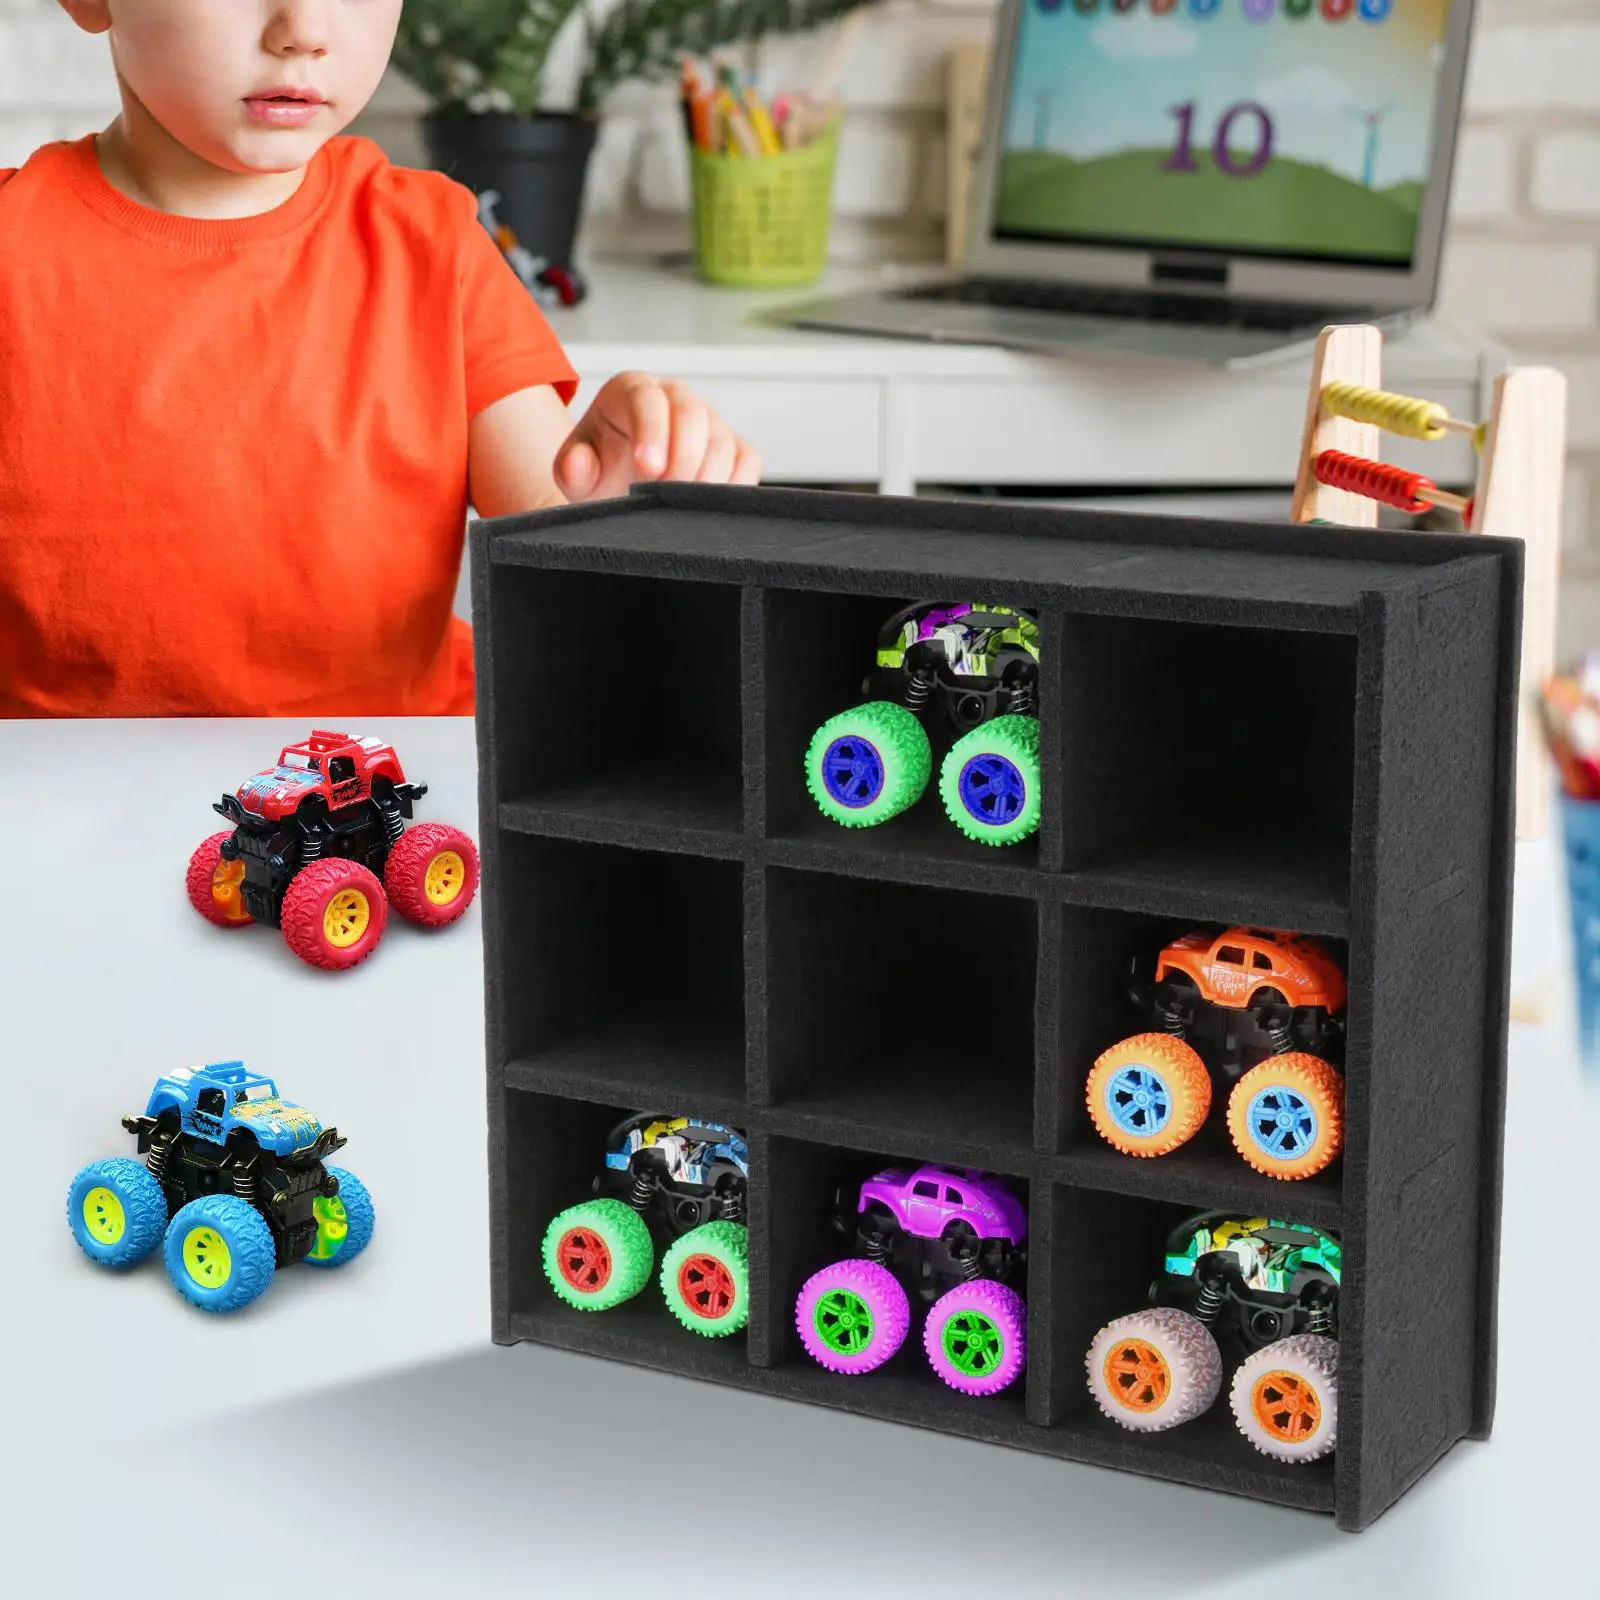 Toy Trucks Door Wall Mounted Storage Case Easily Install Felt Material for Kids to Organize Convenient Multipurpose Accessories